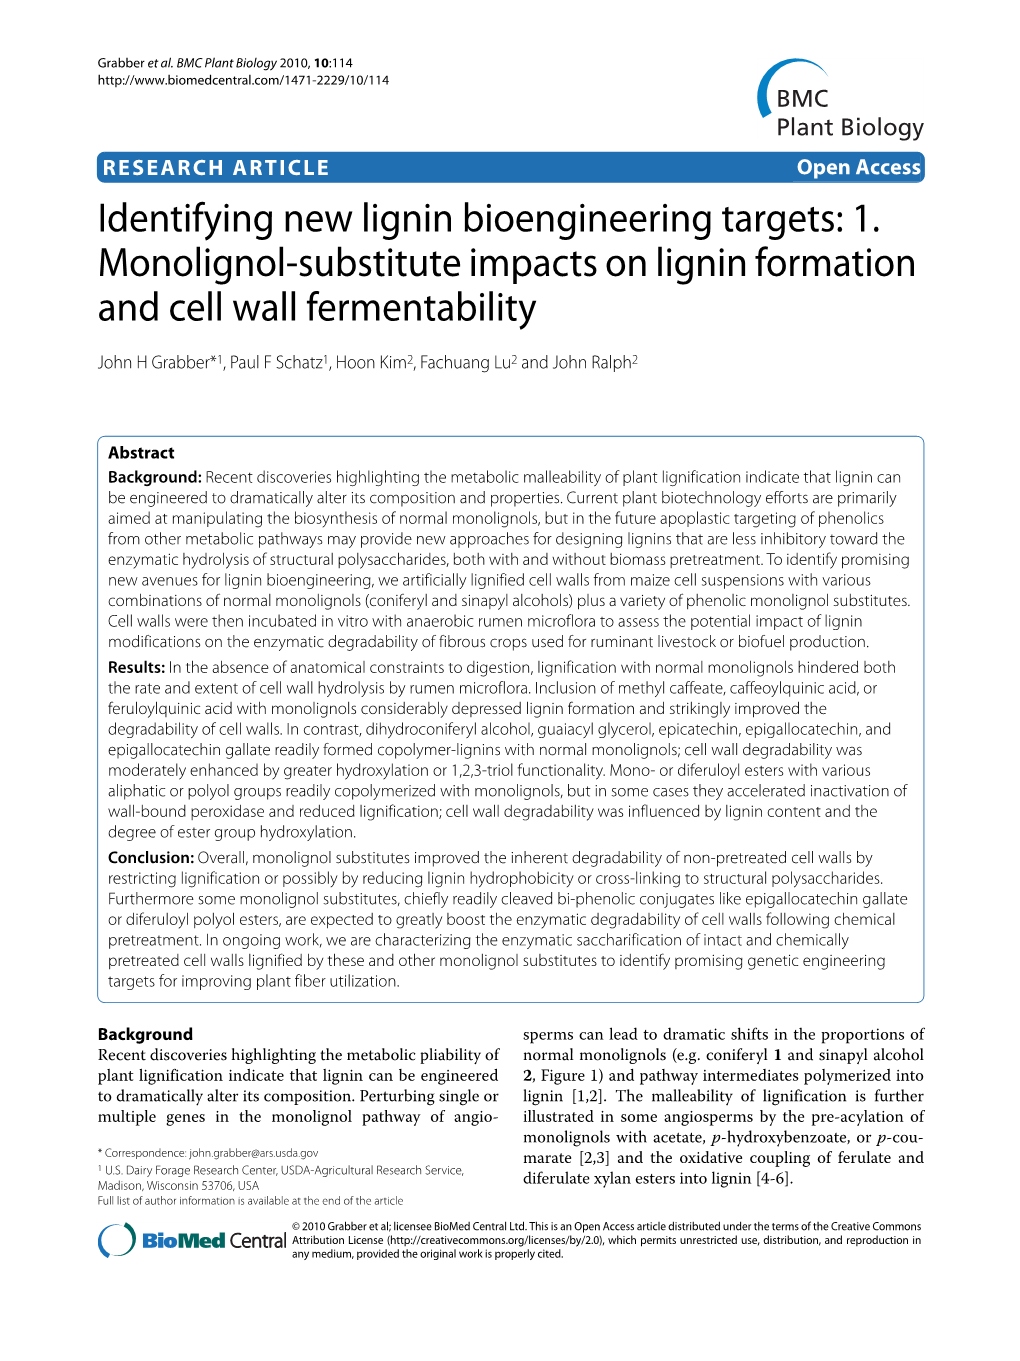 Identifying New Lignin Bioengineering Targets: 1. Monolignol-Substitute Impacts on Lignin Formation and Cell Wall Fermentability